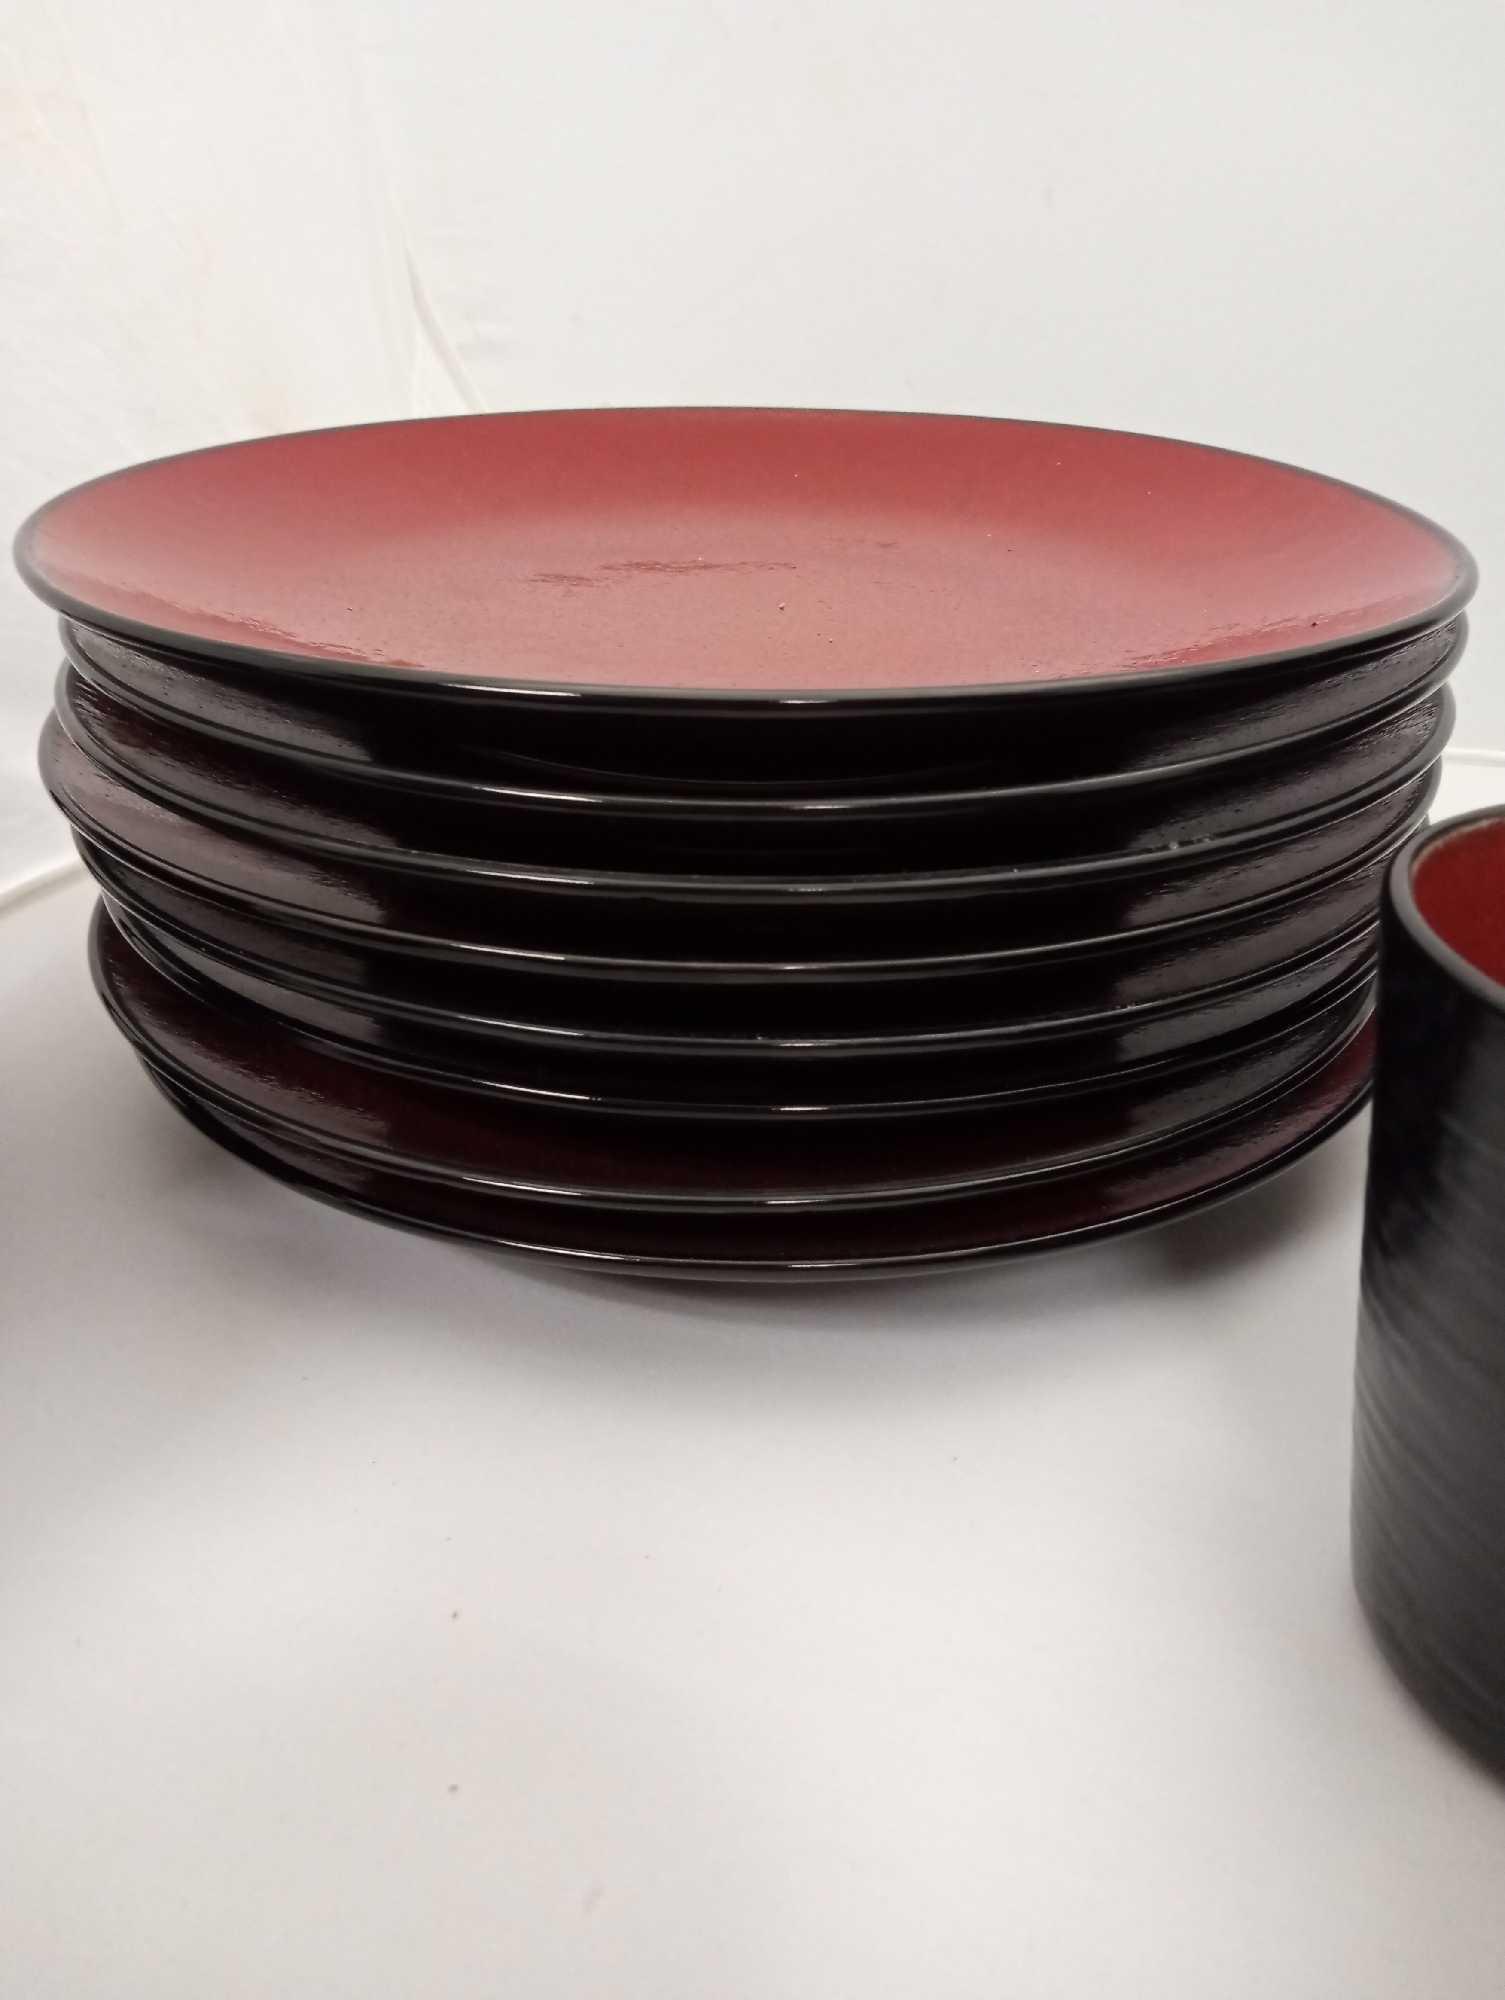 TARGET HOME RED AND BLACK POTTERY DISH SET